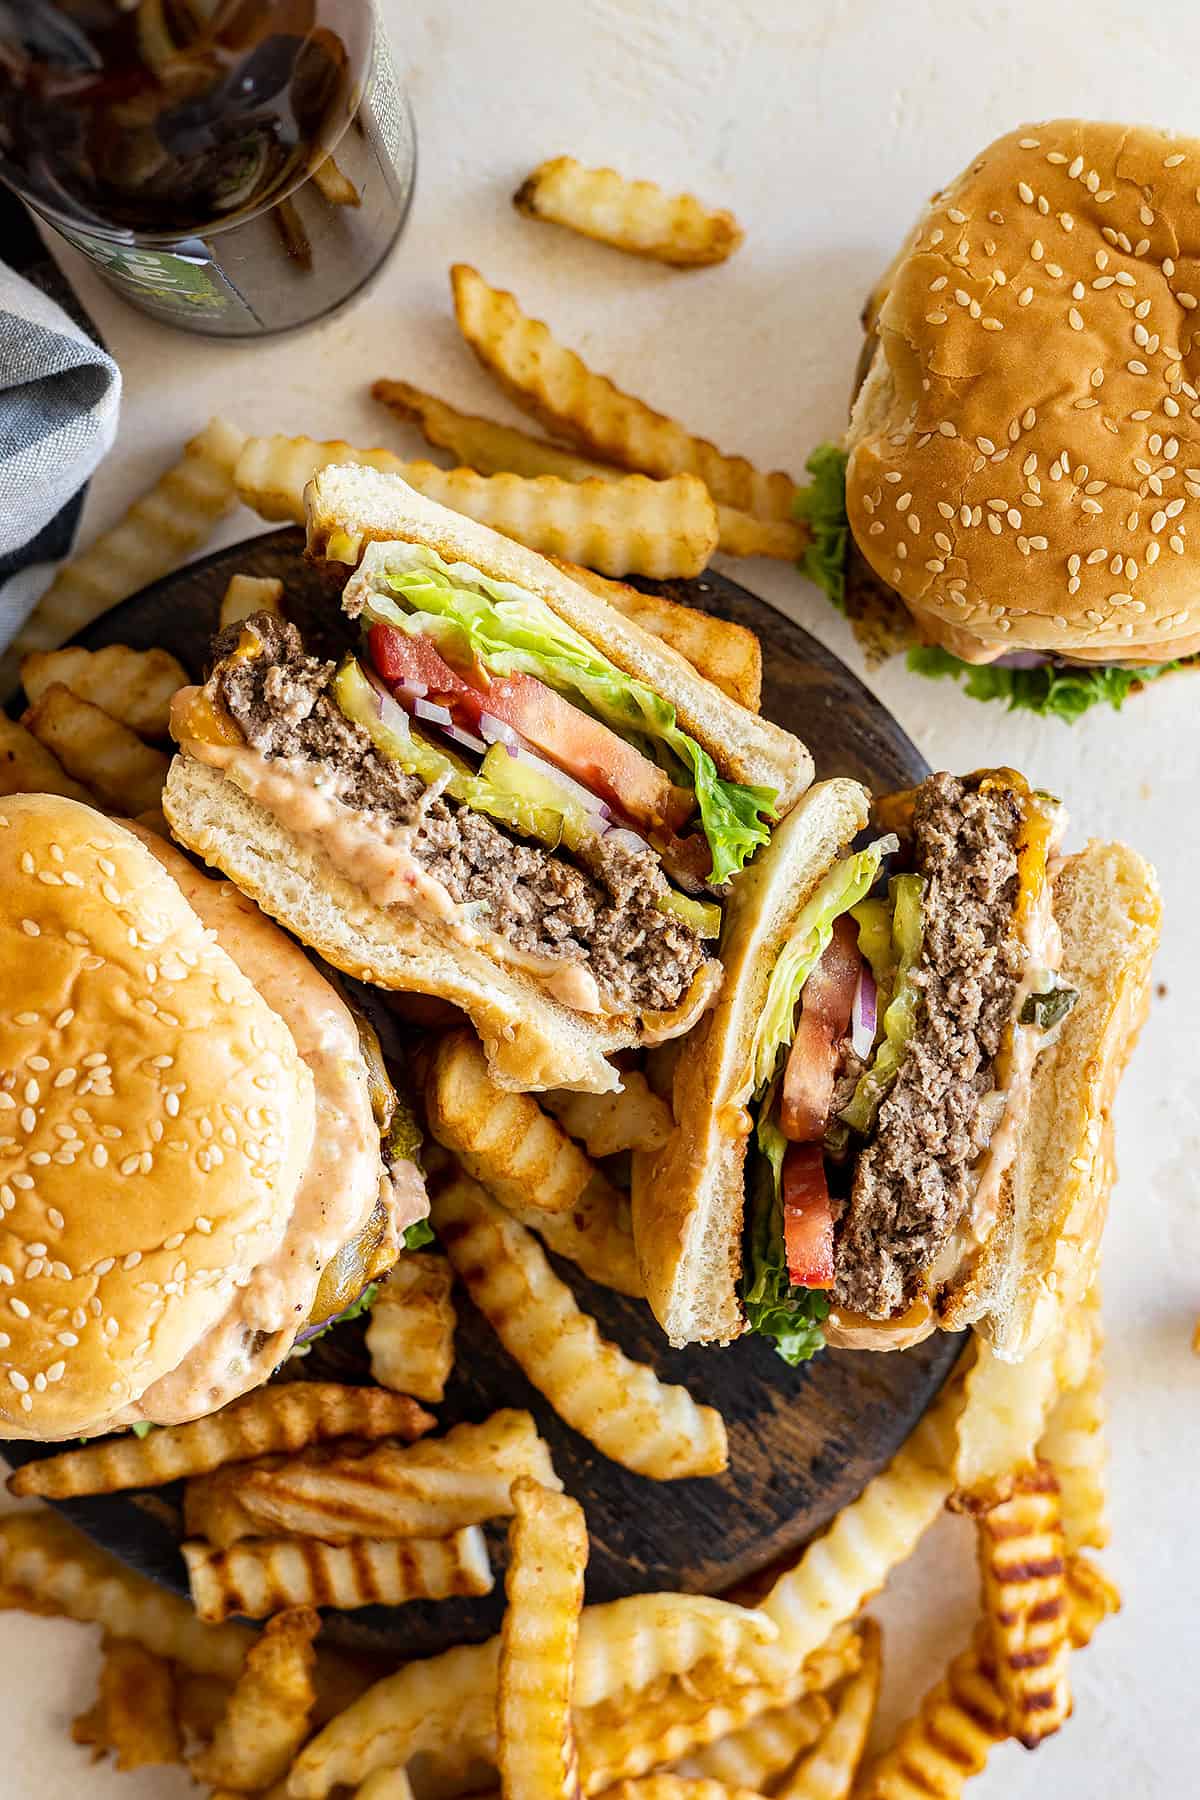 Overhead view of hamburgers with fries scattered around. One hamburger is cut in half and on its side showing the yummy juicy inside. 